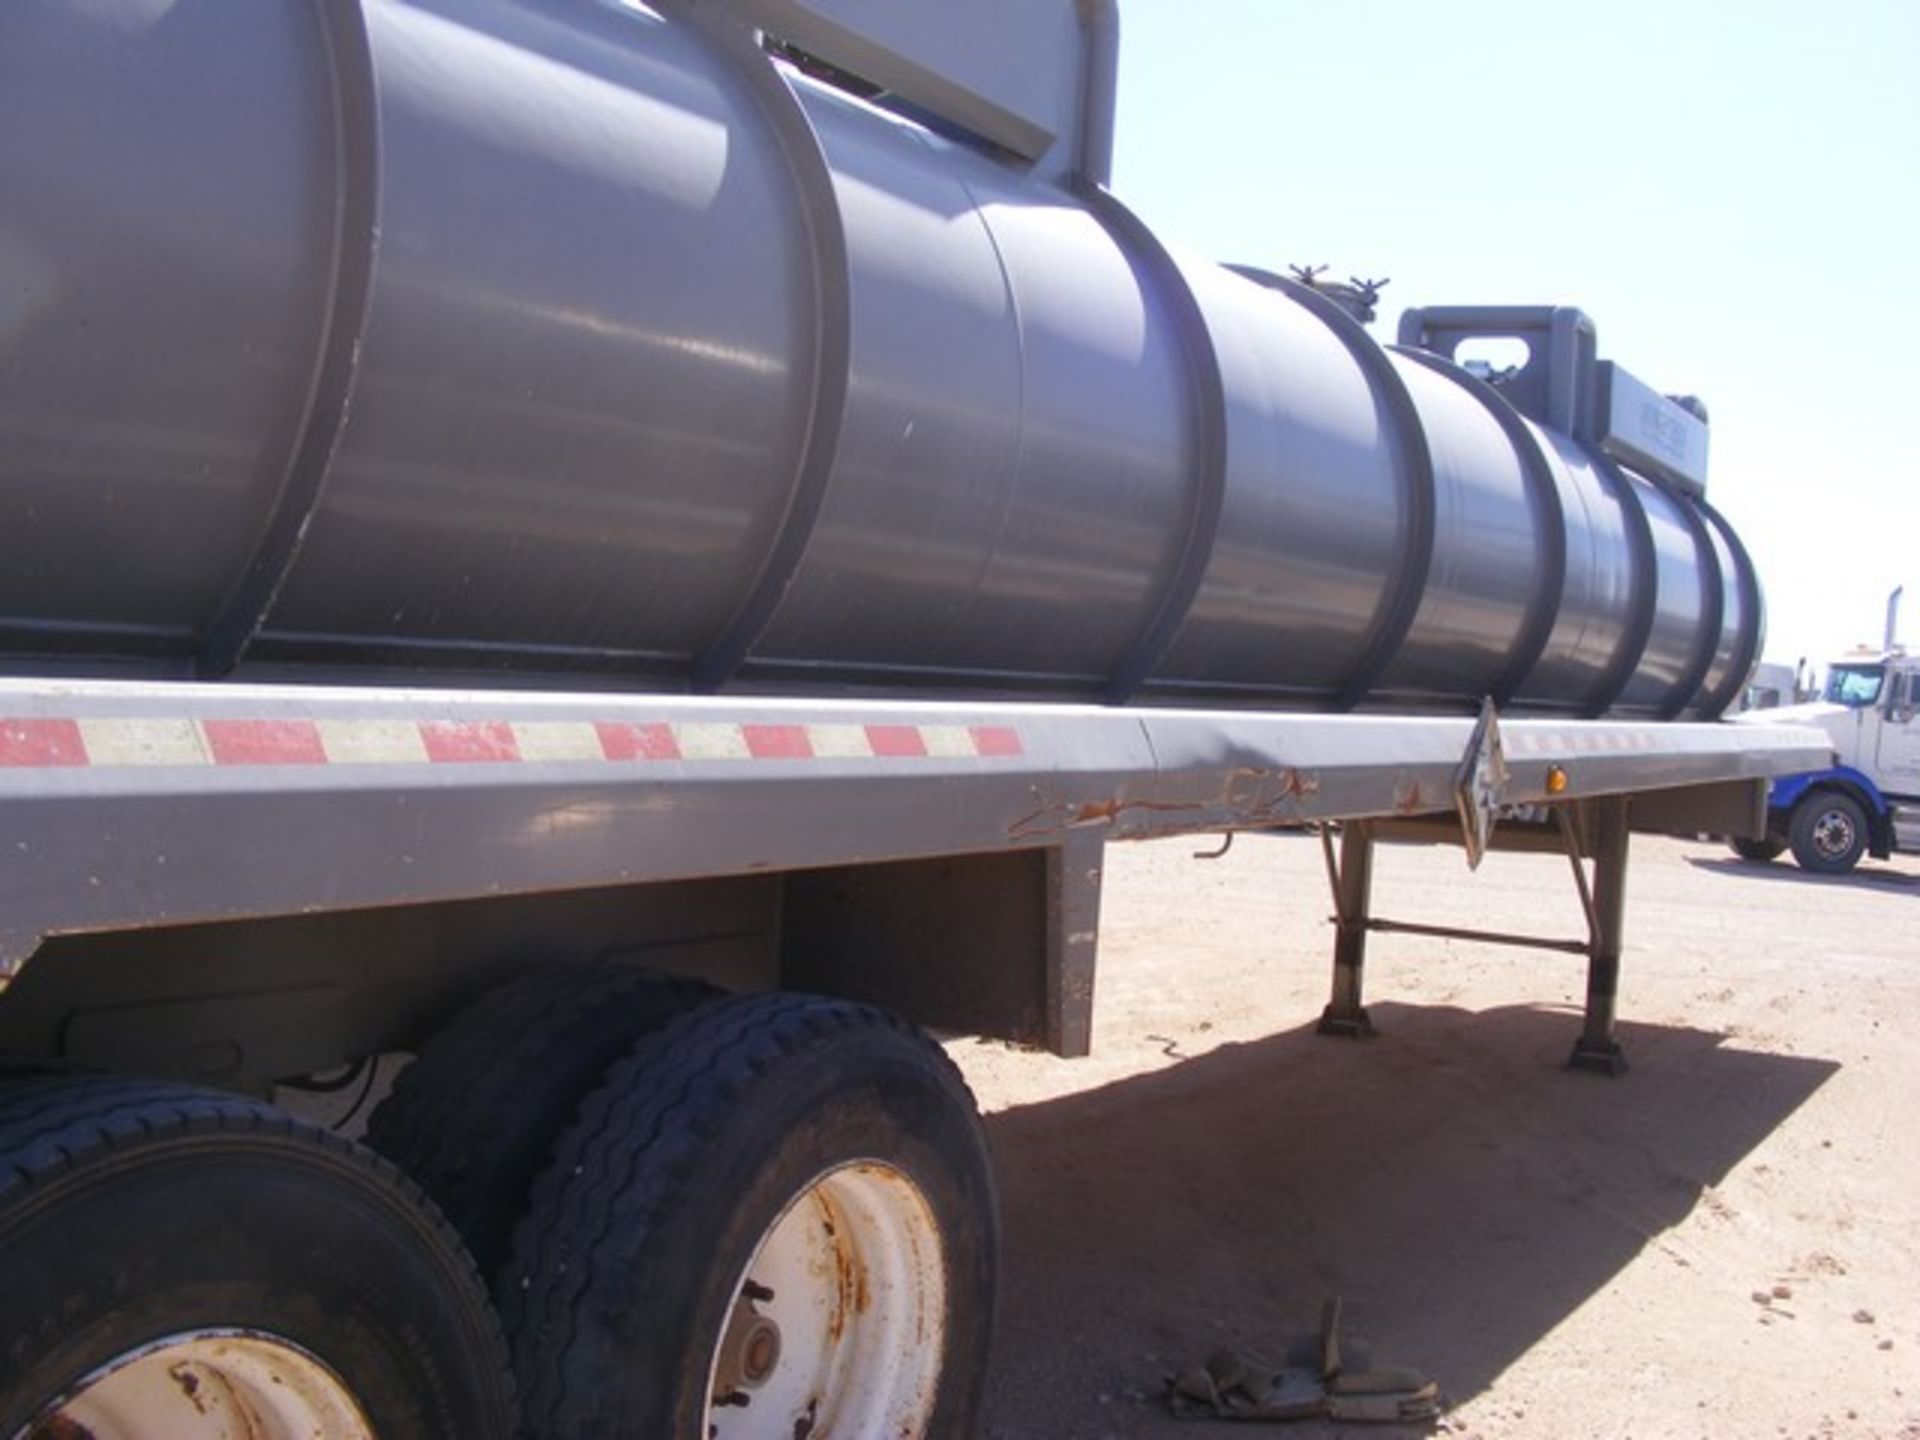 Located in YARD 1 - Midland, TX (402) (X) 2008 DRAGON 130 BBL T/A VAC TRAILER, VIN- - Image 4 of 4